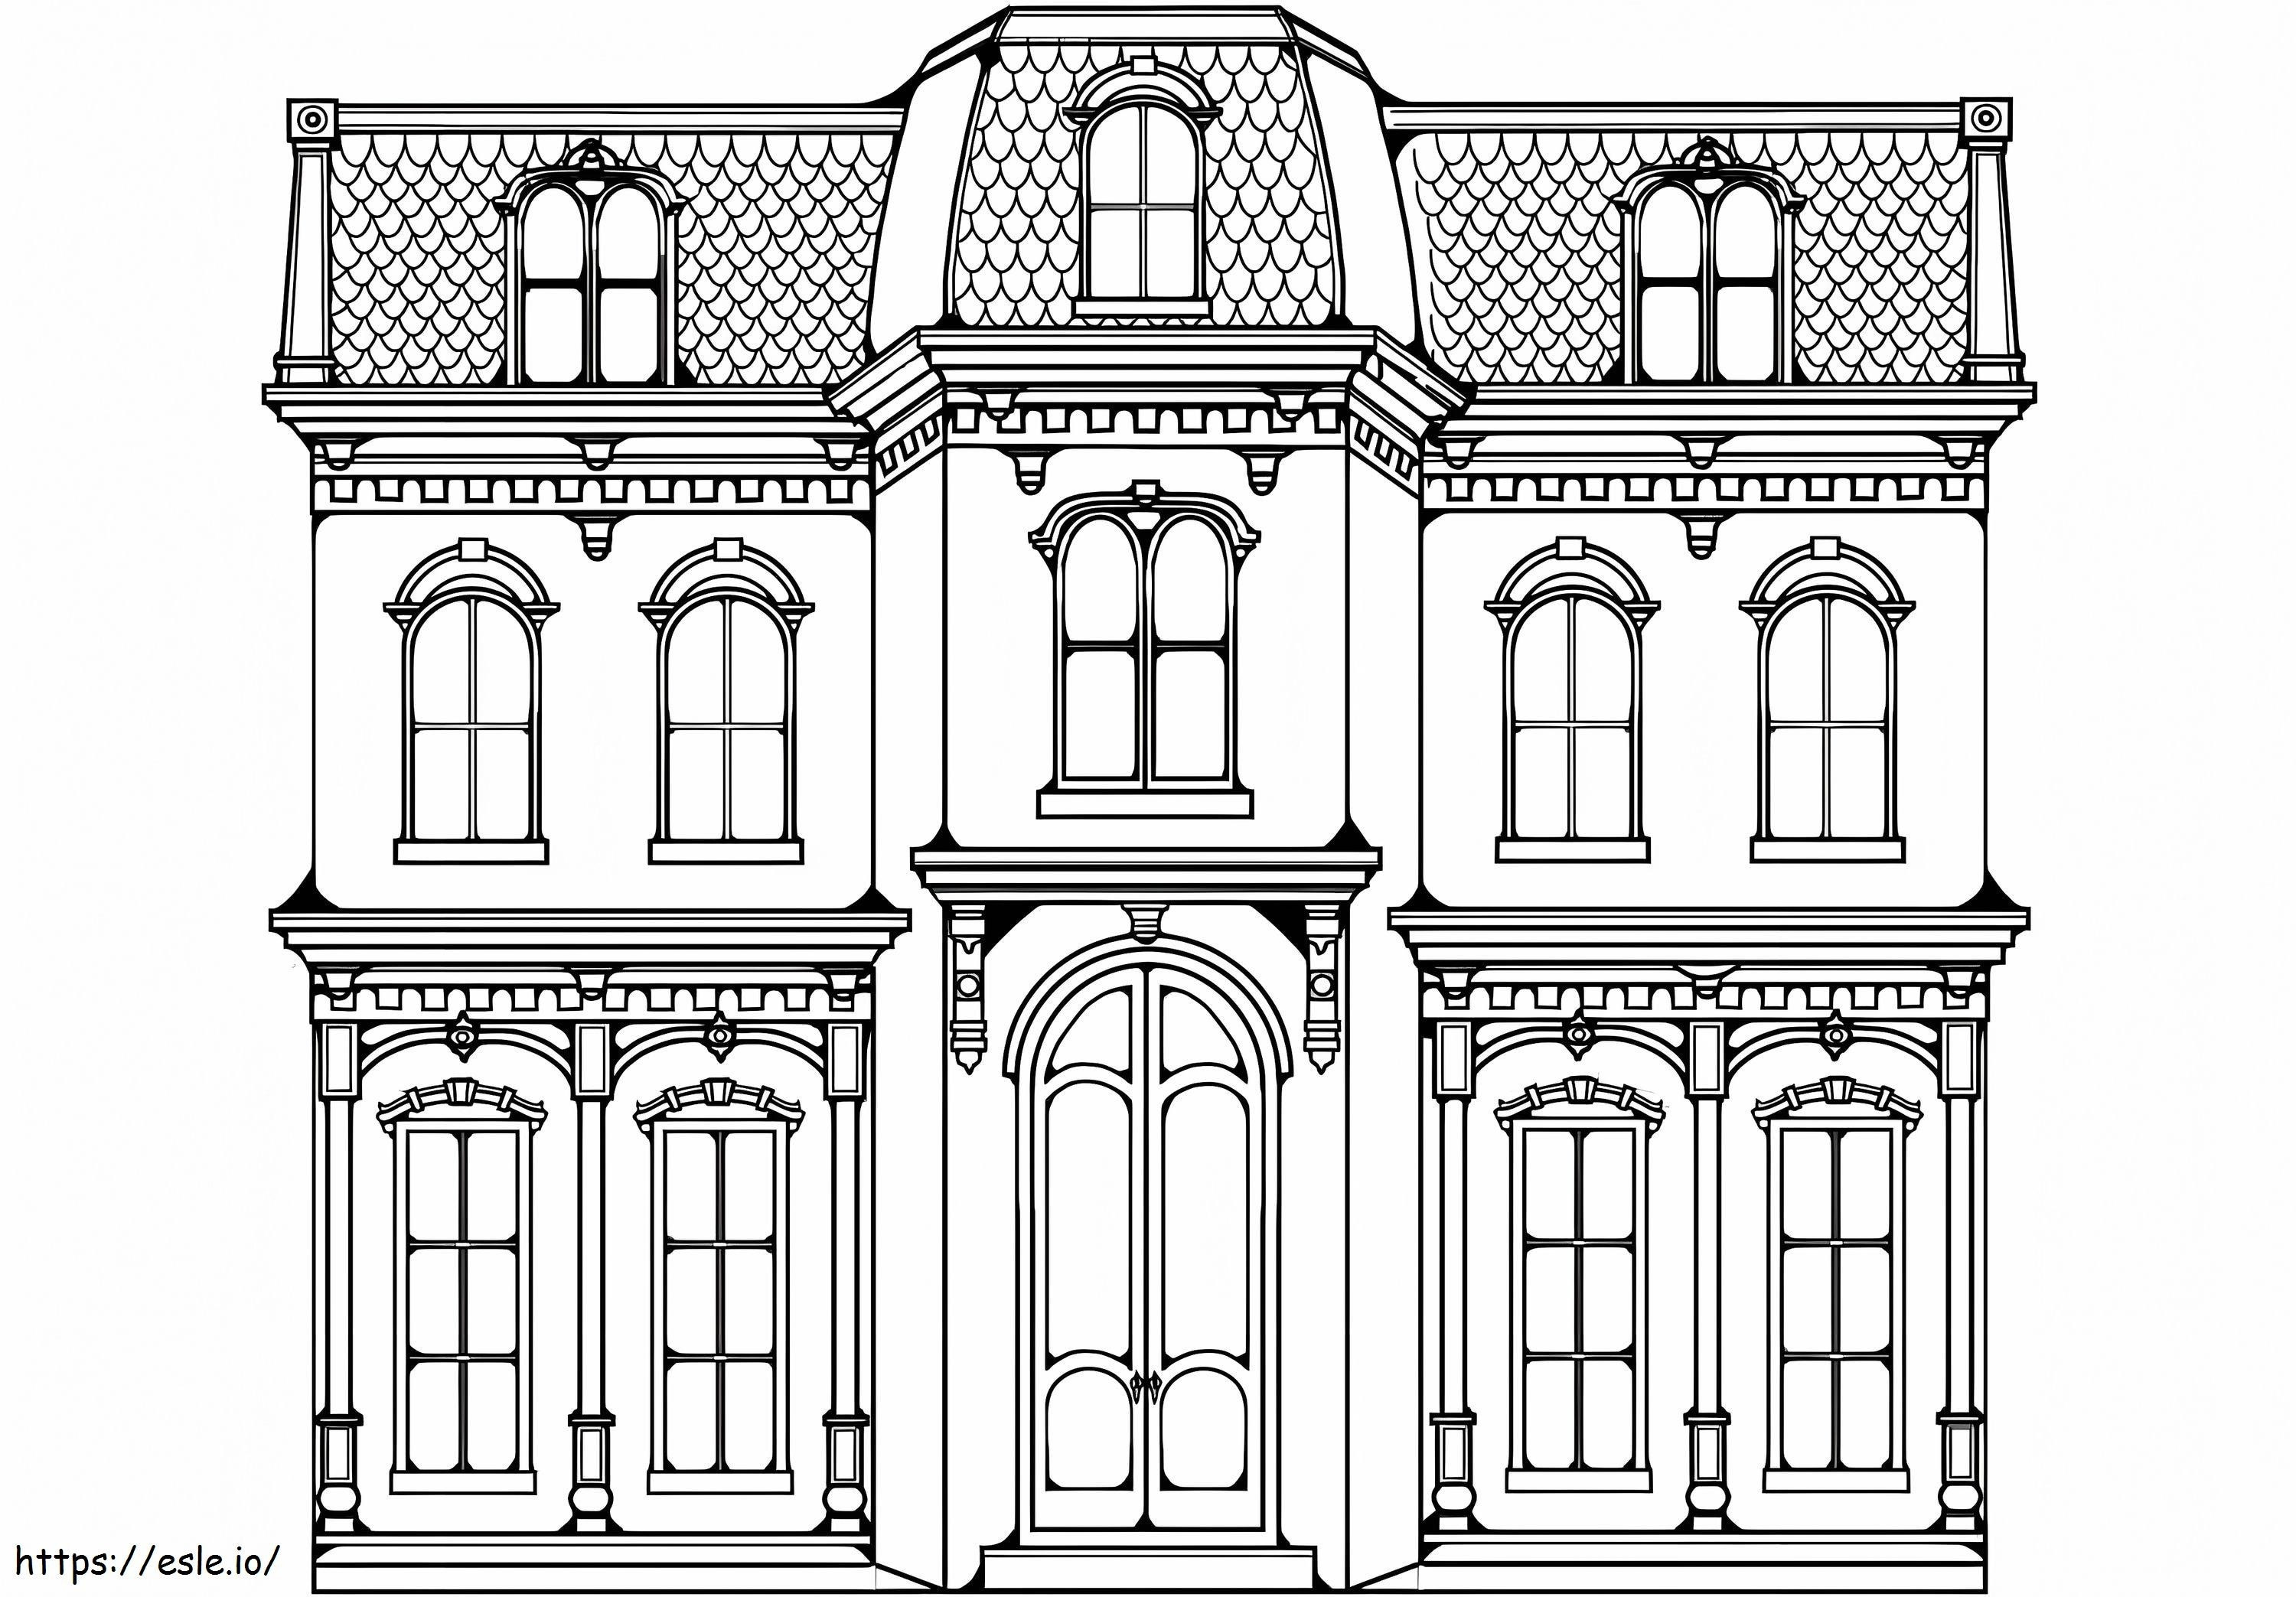 Big House coloring page